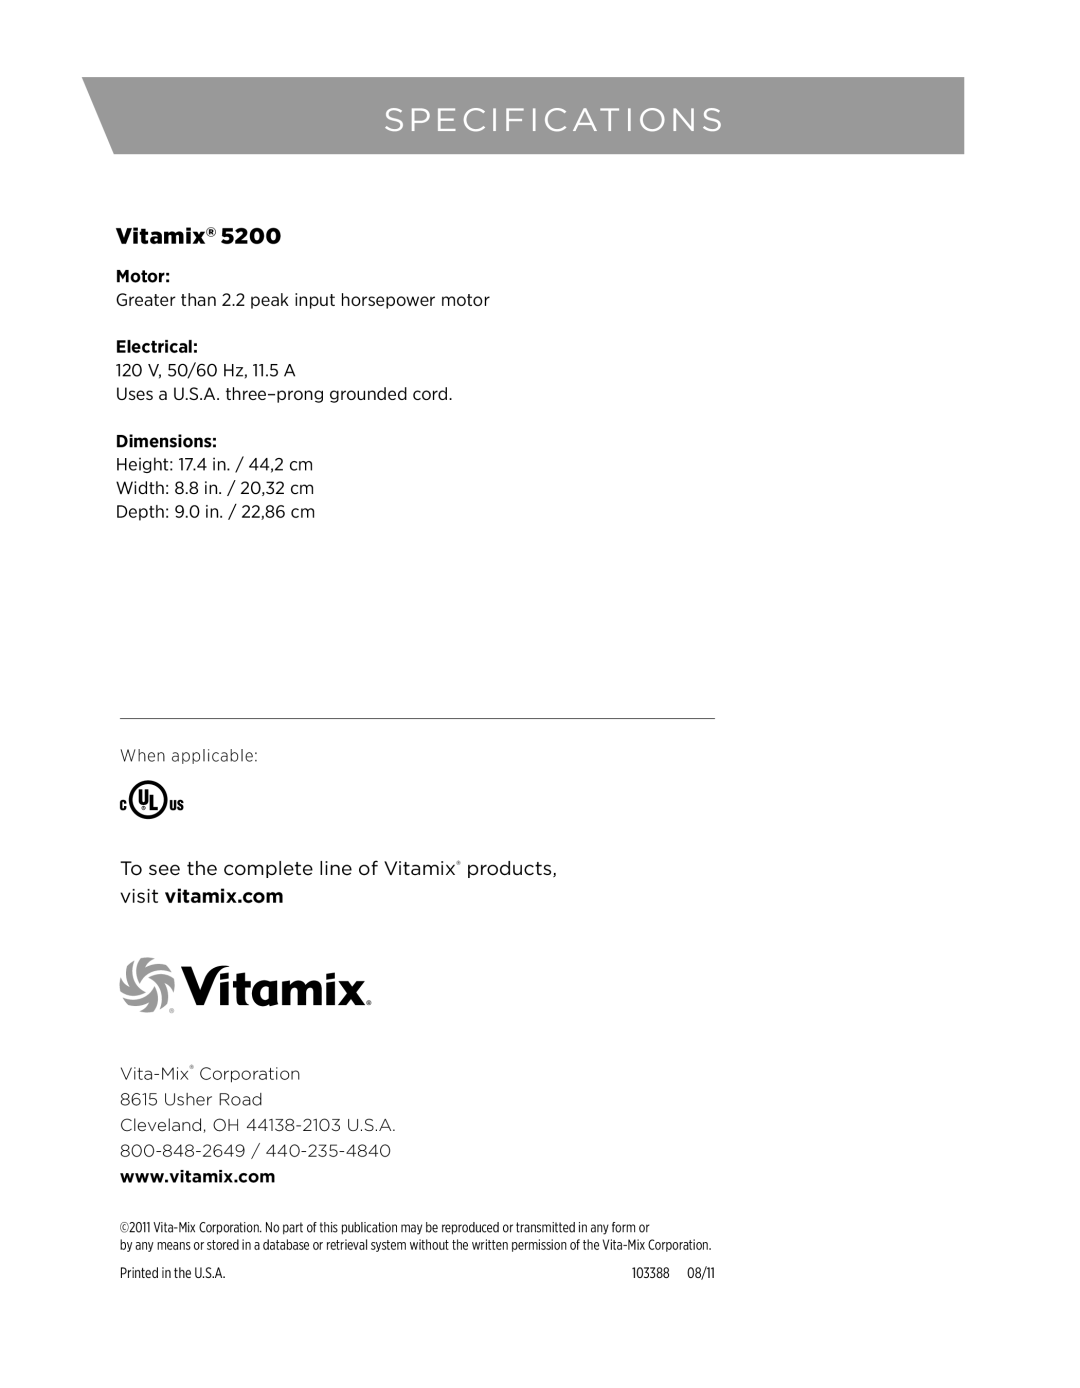 Vita-Mix CREATIONS GALAXY CLASS Specifications, To see the complete line of Vitamix products, visit vitamix.com, Motor 